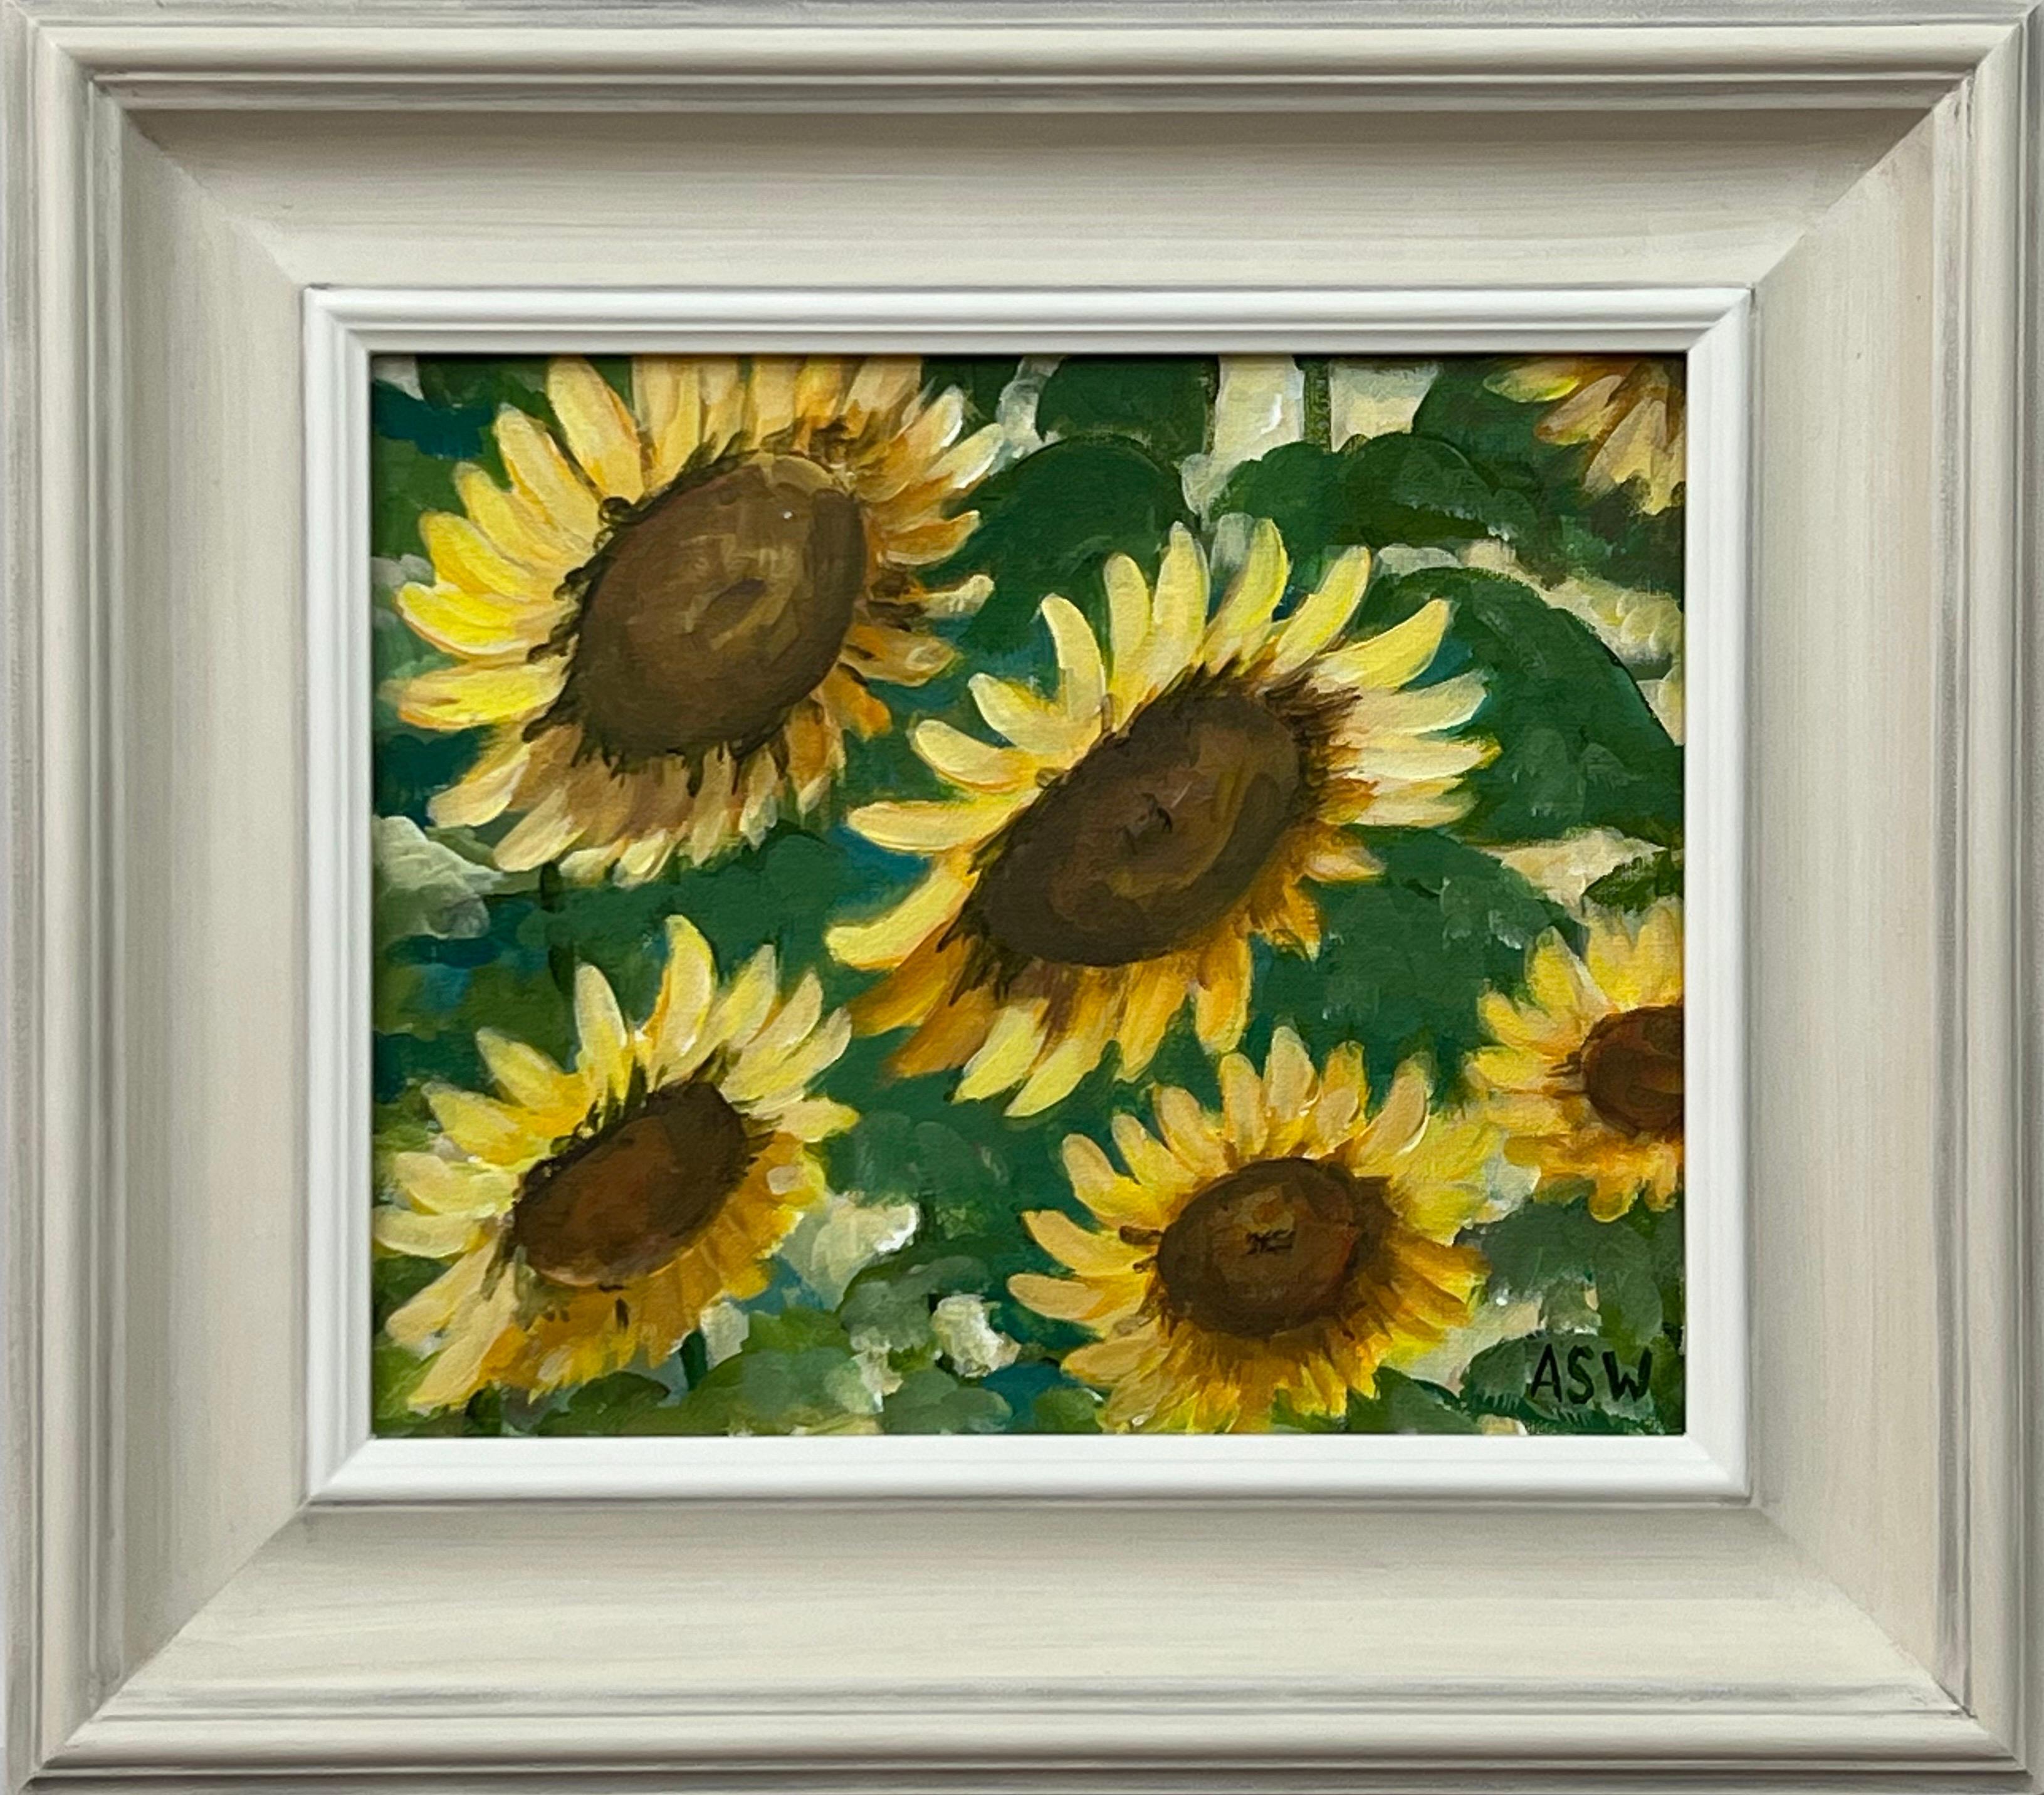 Angela Wakefield Still-Life Painting - Golden Yellow Sunflowers Study on Green Background by Contemporary Artist